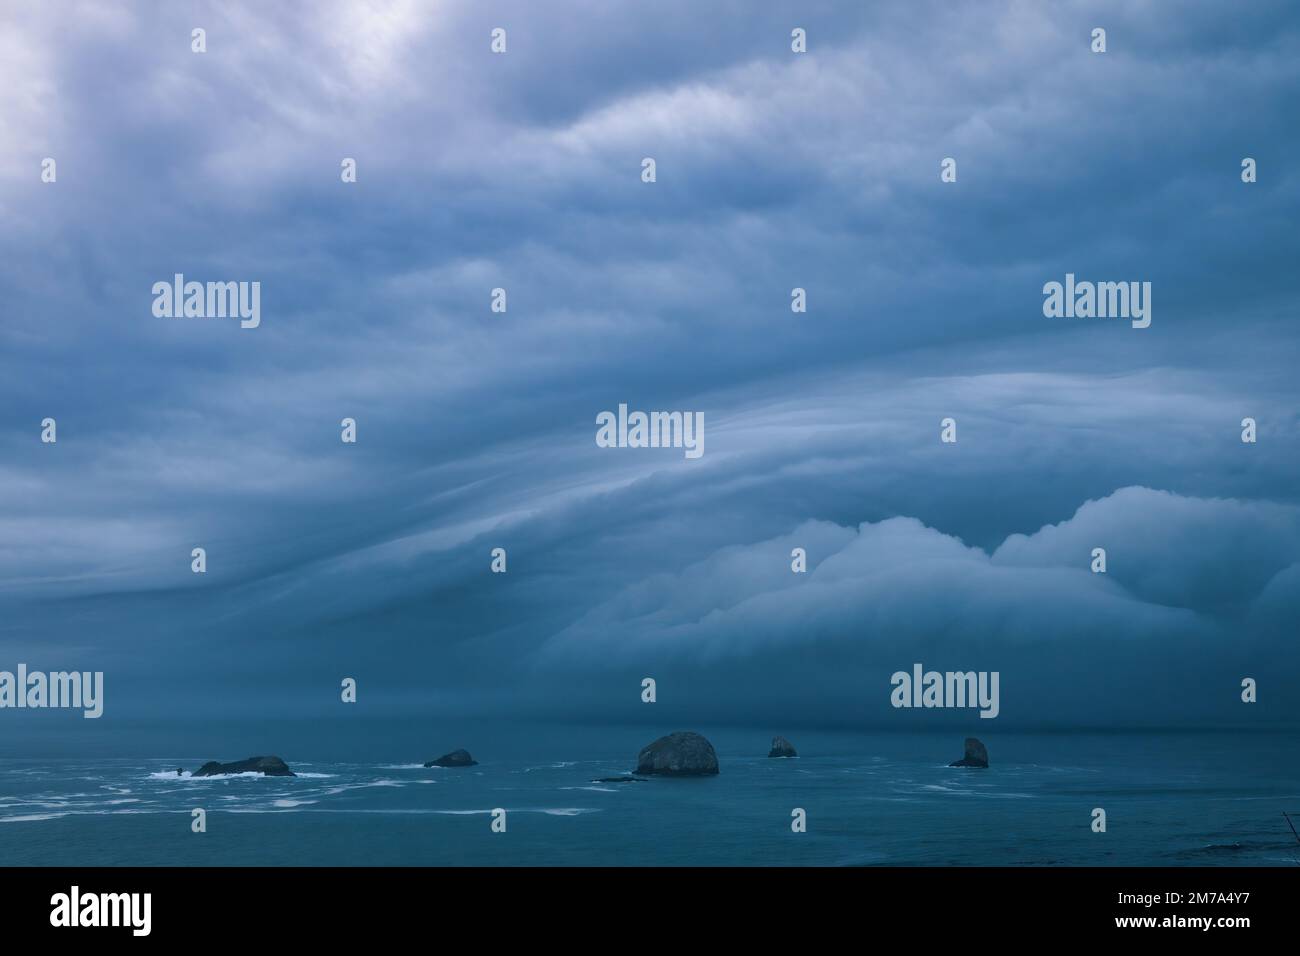 Storm clouds from bomb cyclone over sea stacks in the ocean Stock Photo